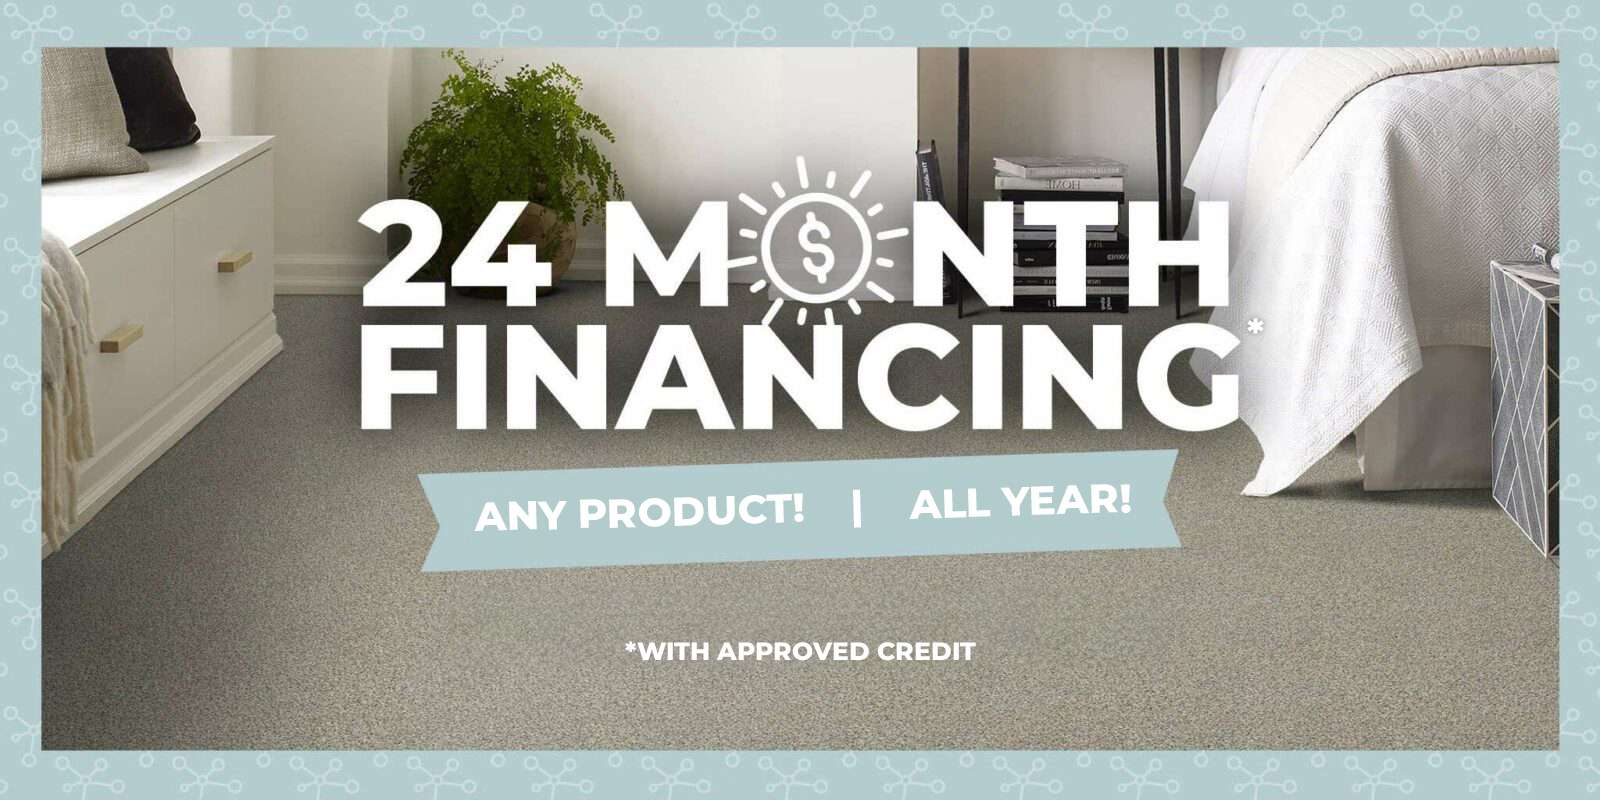 24 Month Financing with approved credit. Any product! All year!